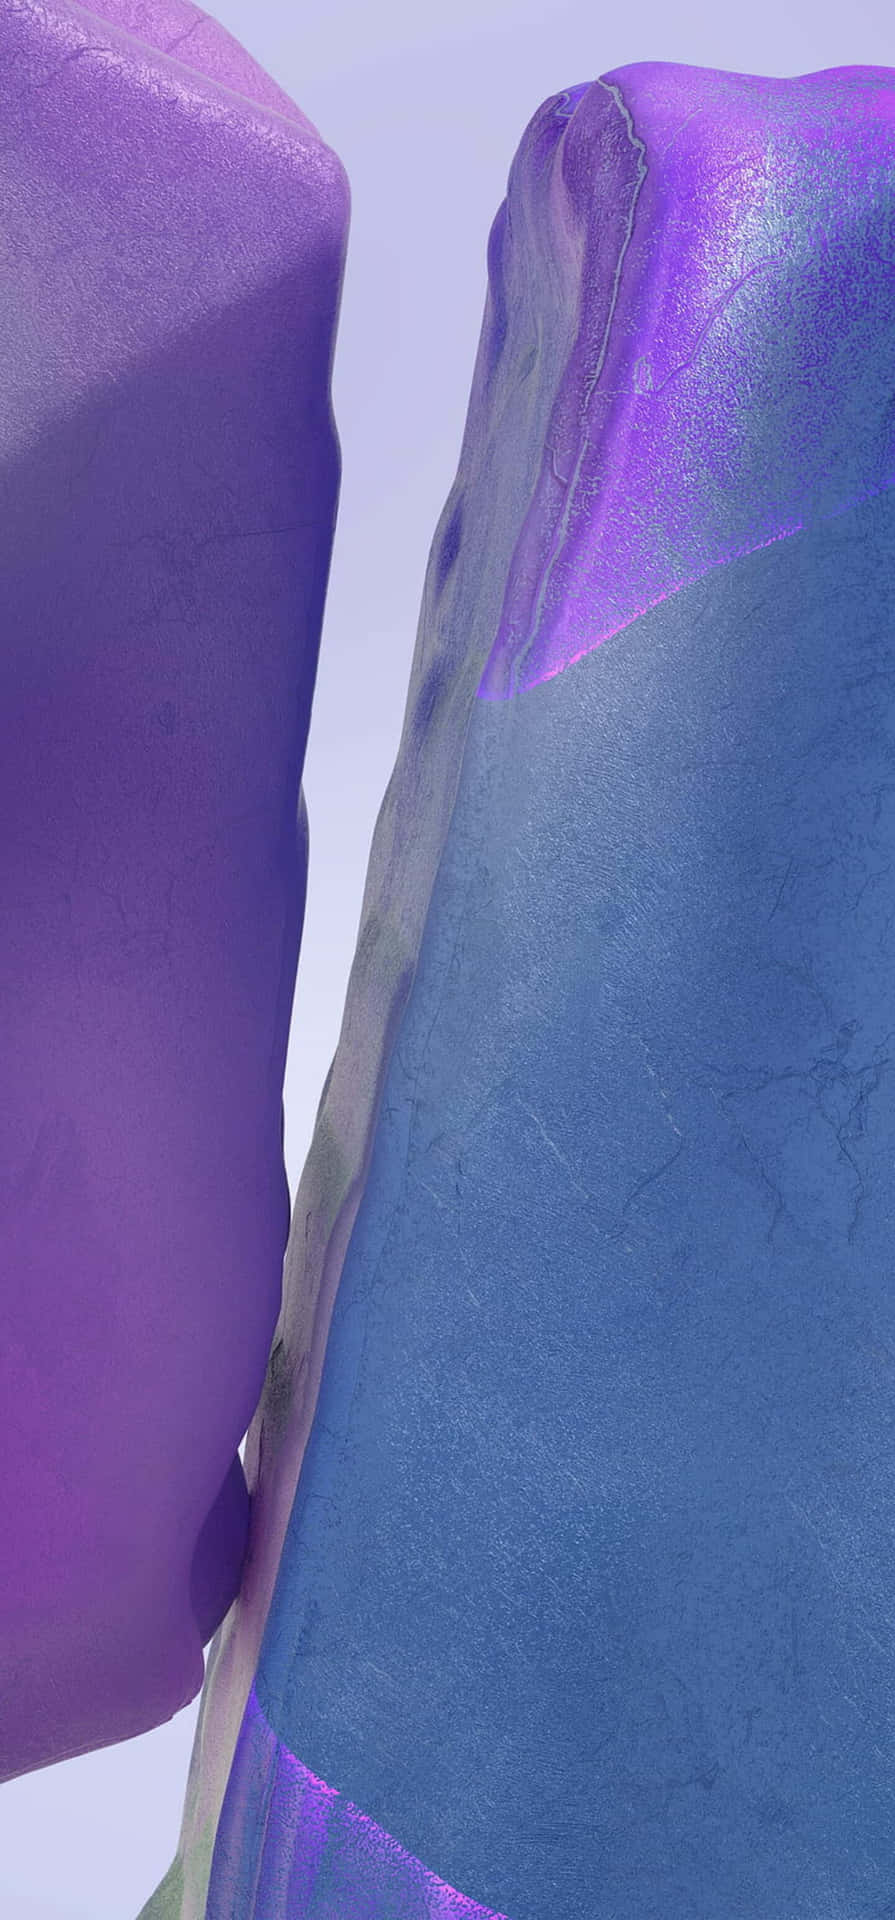 Abstract Purpleand Blue Textures Wallpaper